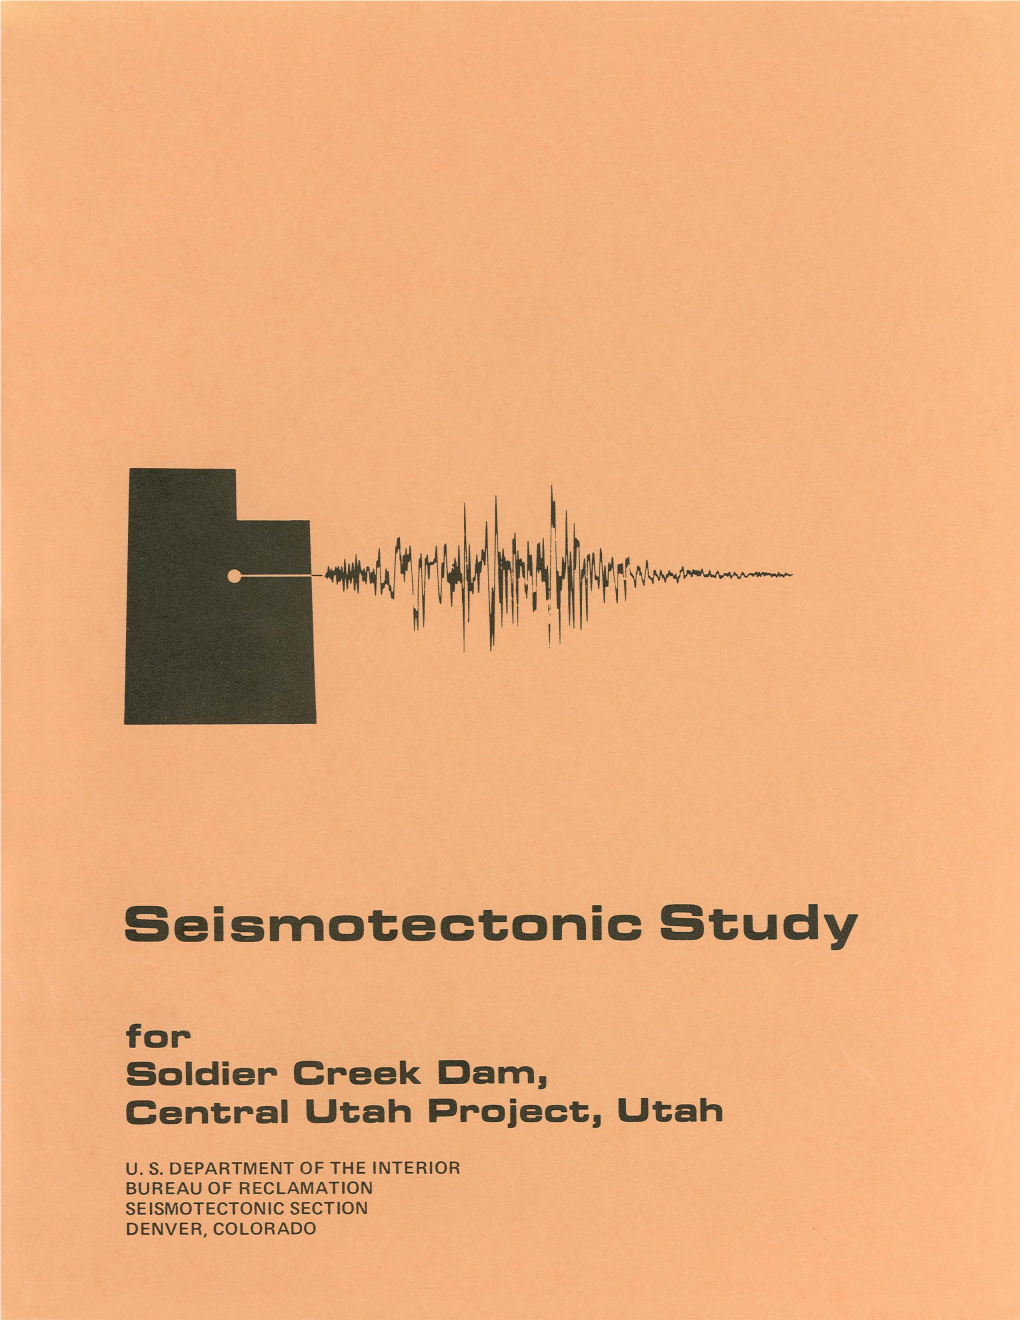 Seismotectonic Study for Soldier Creek Dam, Central Utah Project